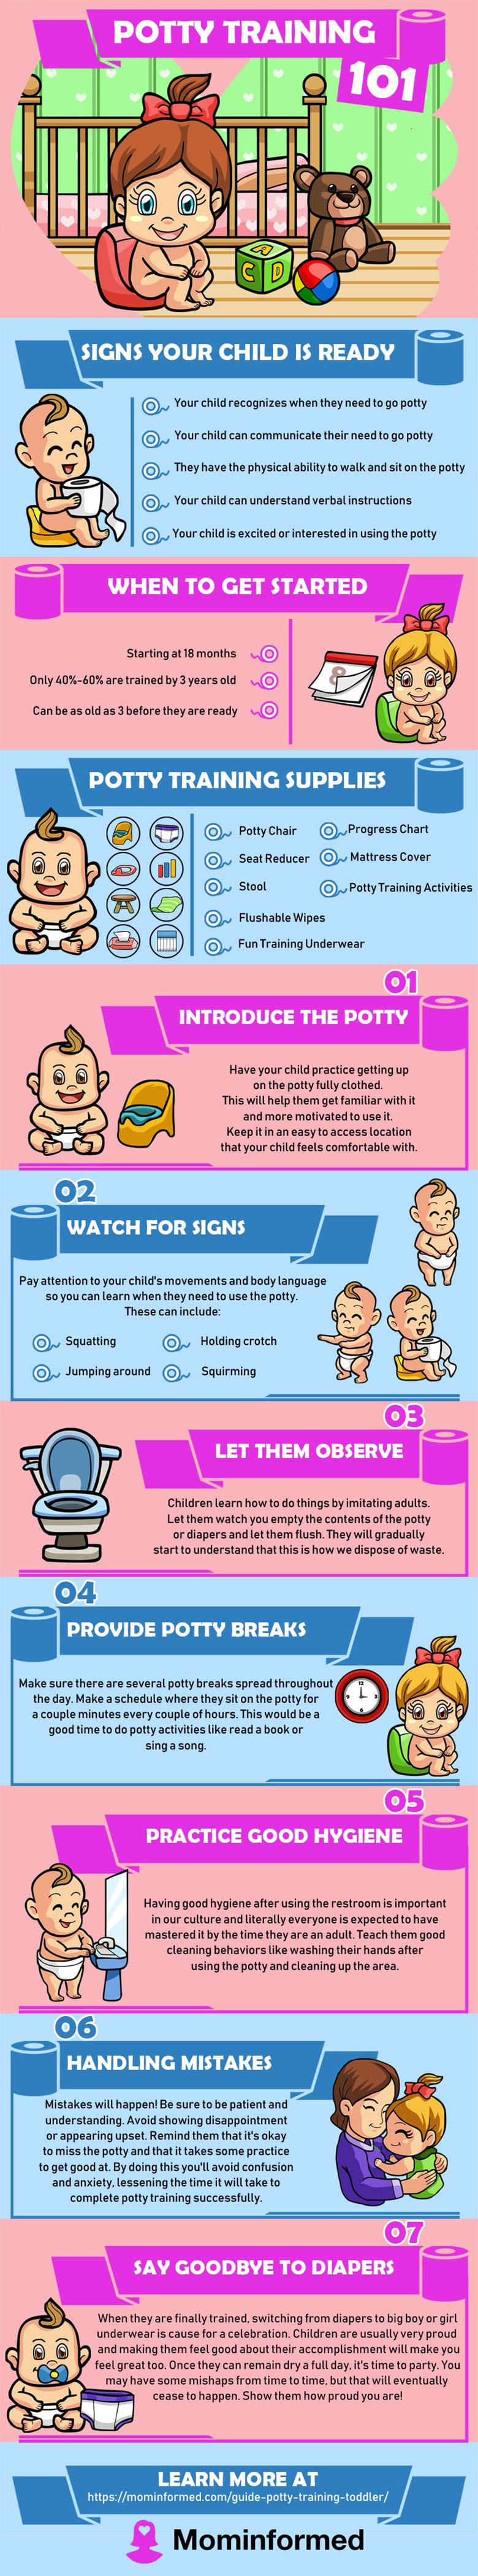 Potty Training 101 Infographic MomInformed.com